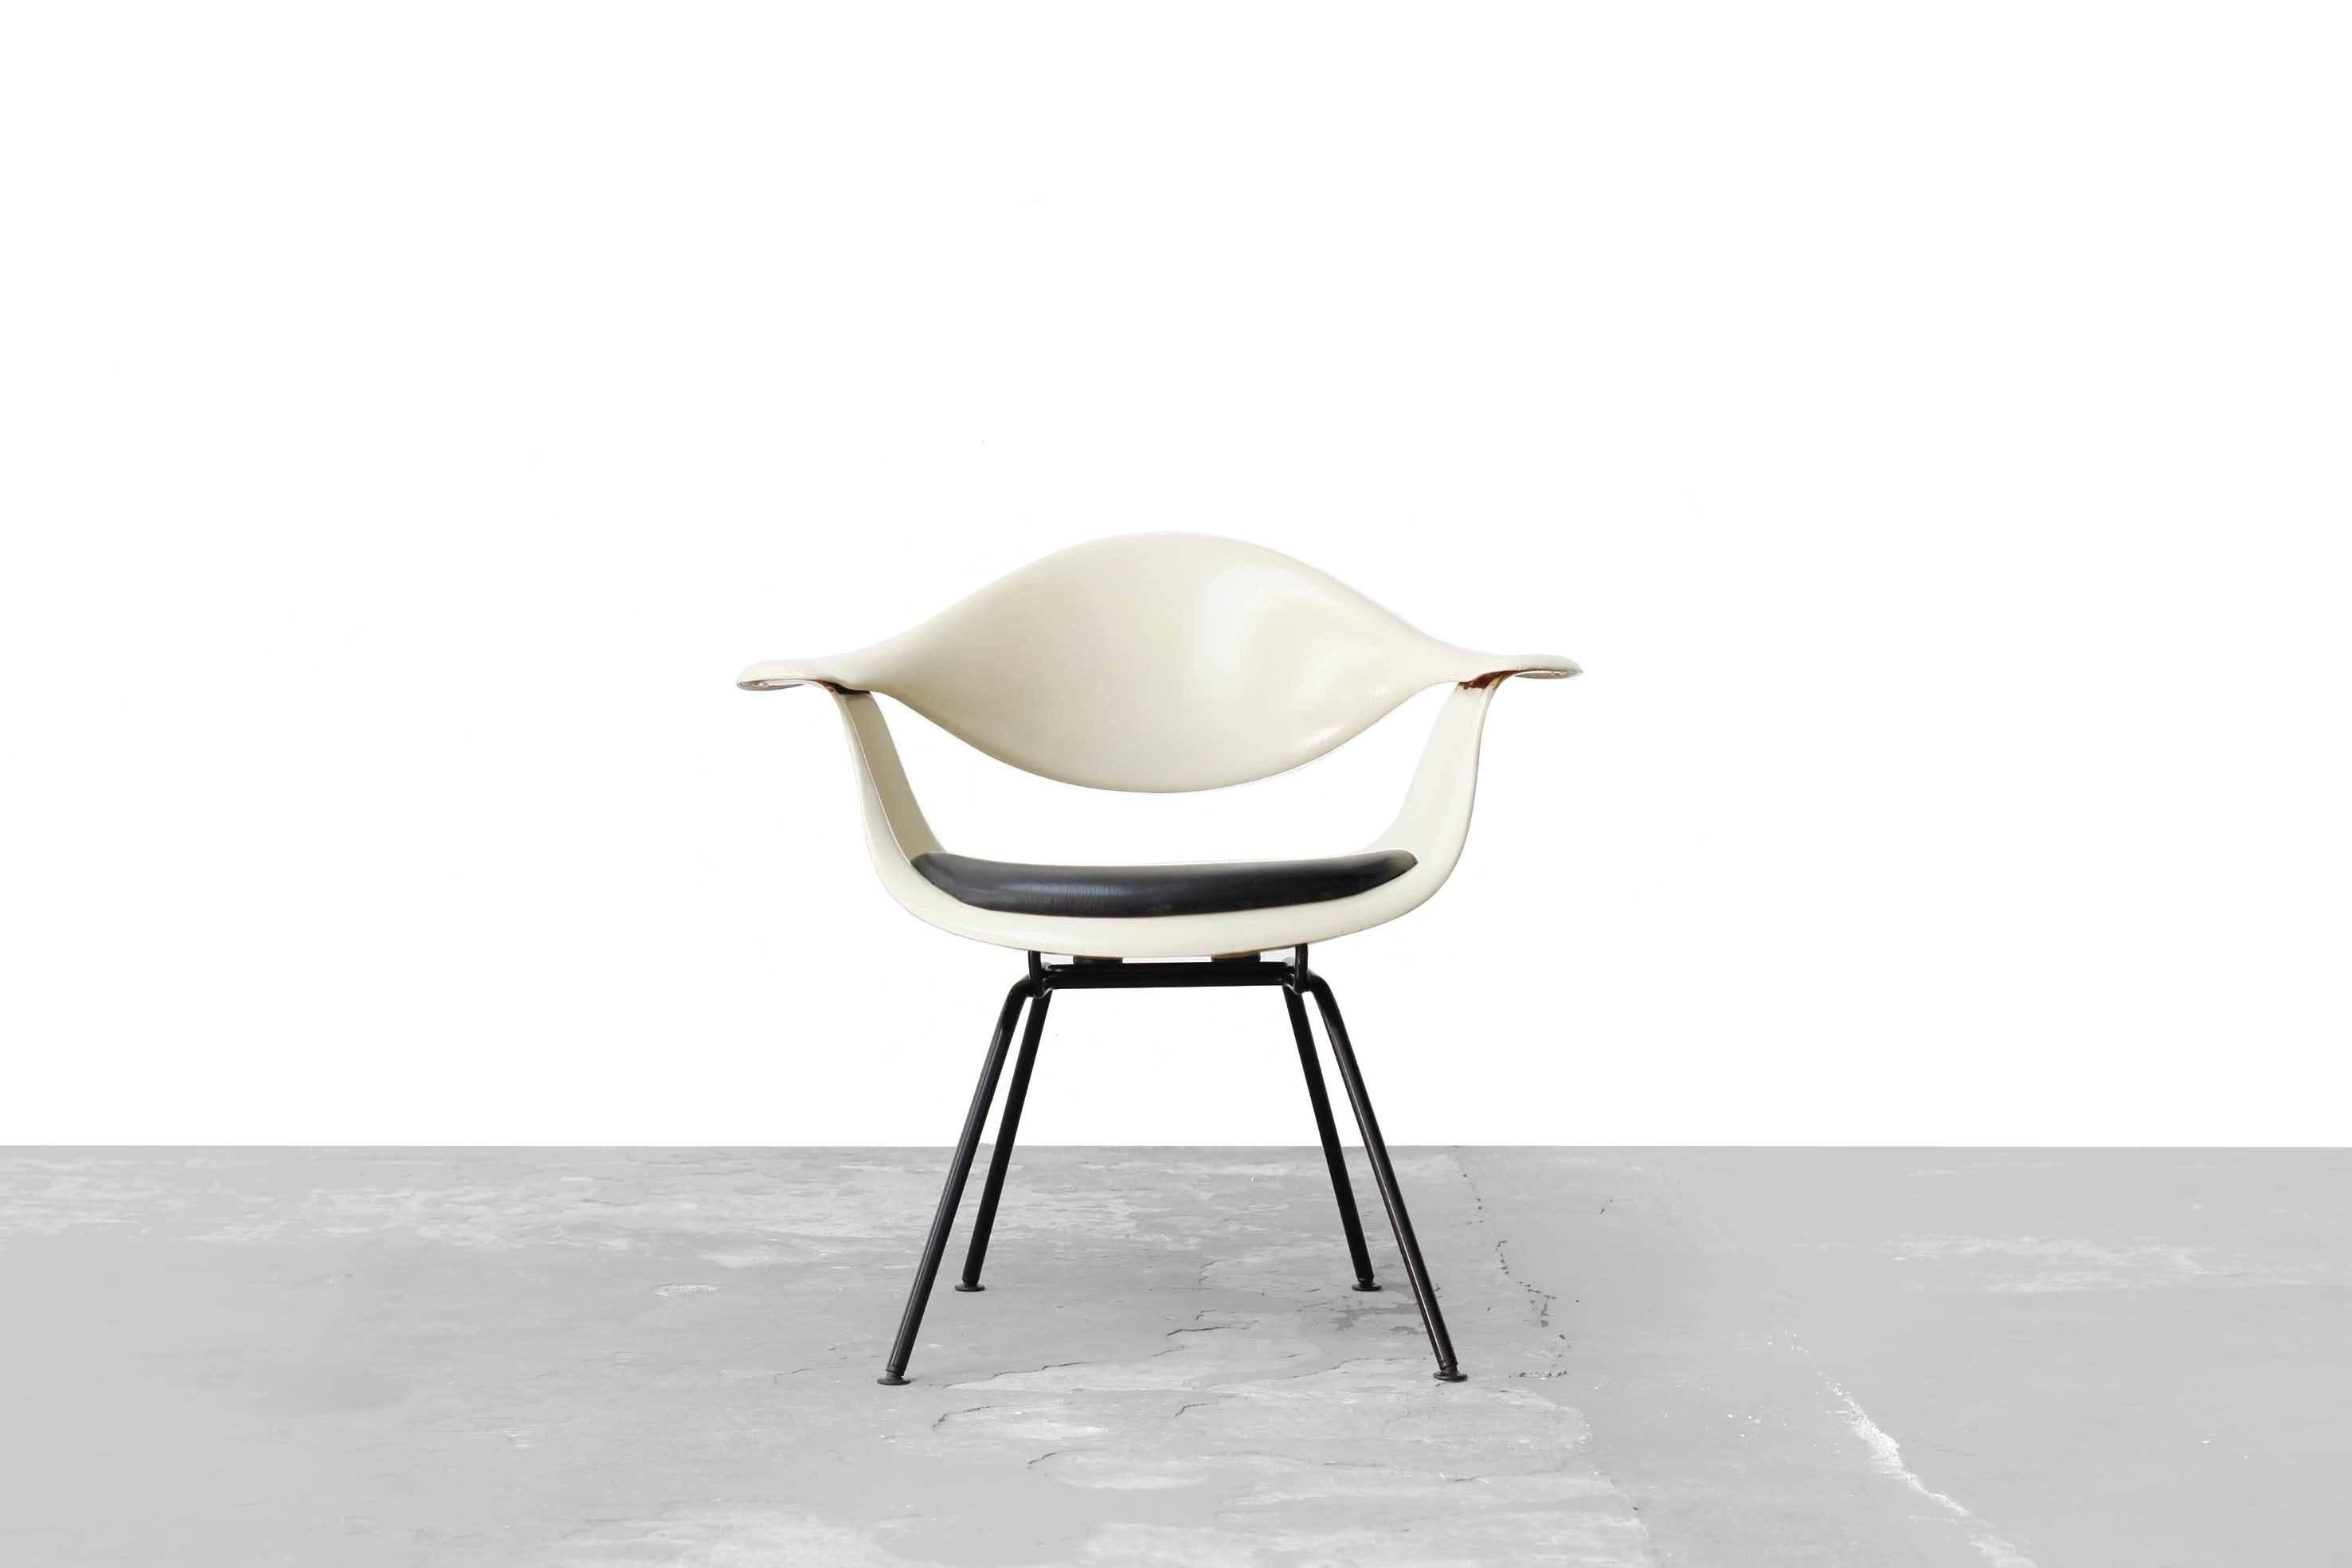 DAF chair low H-base designed by George Nelson for Herman Miller, 1958.
Off-white fiber glass seat shell with black leather seat. Light traces of use.